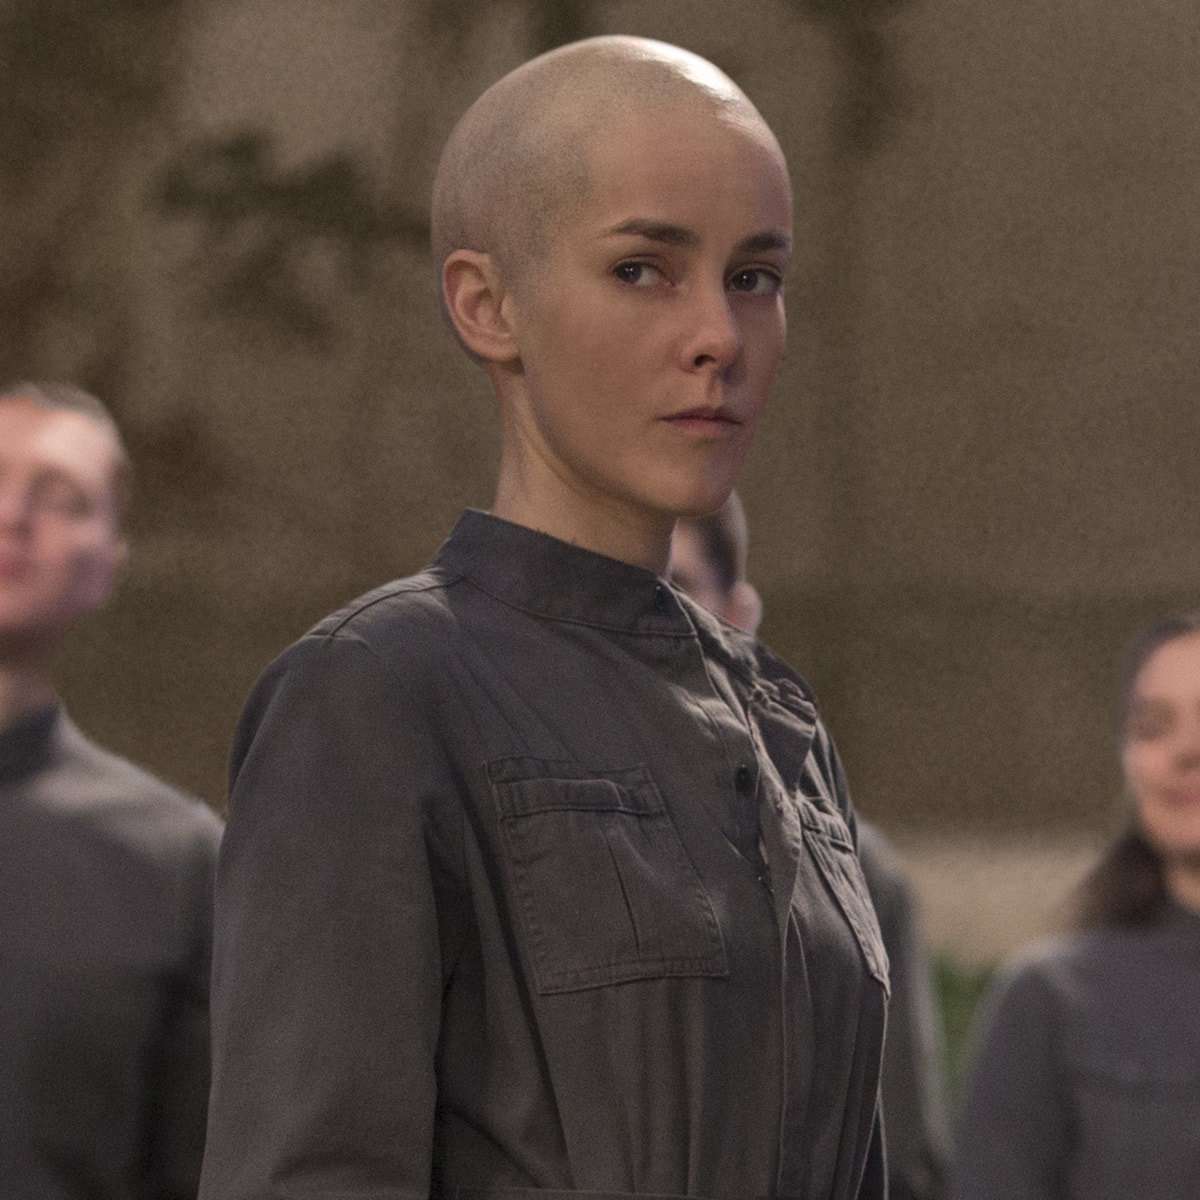 Jena Malone says Johanna's bald look in "The Hunger Games: Mockingjay - Part 2" was achieved through a combination of CGI, a bald cap with tracking dots, and a bald-headed stand-in